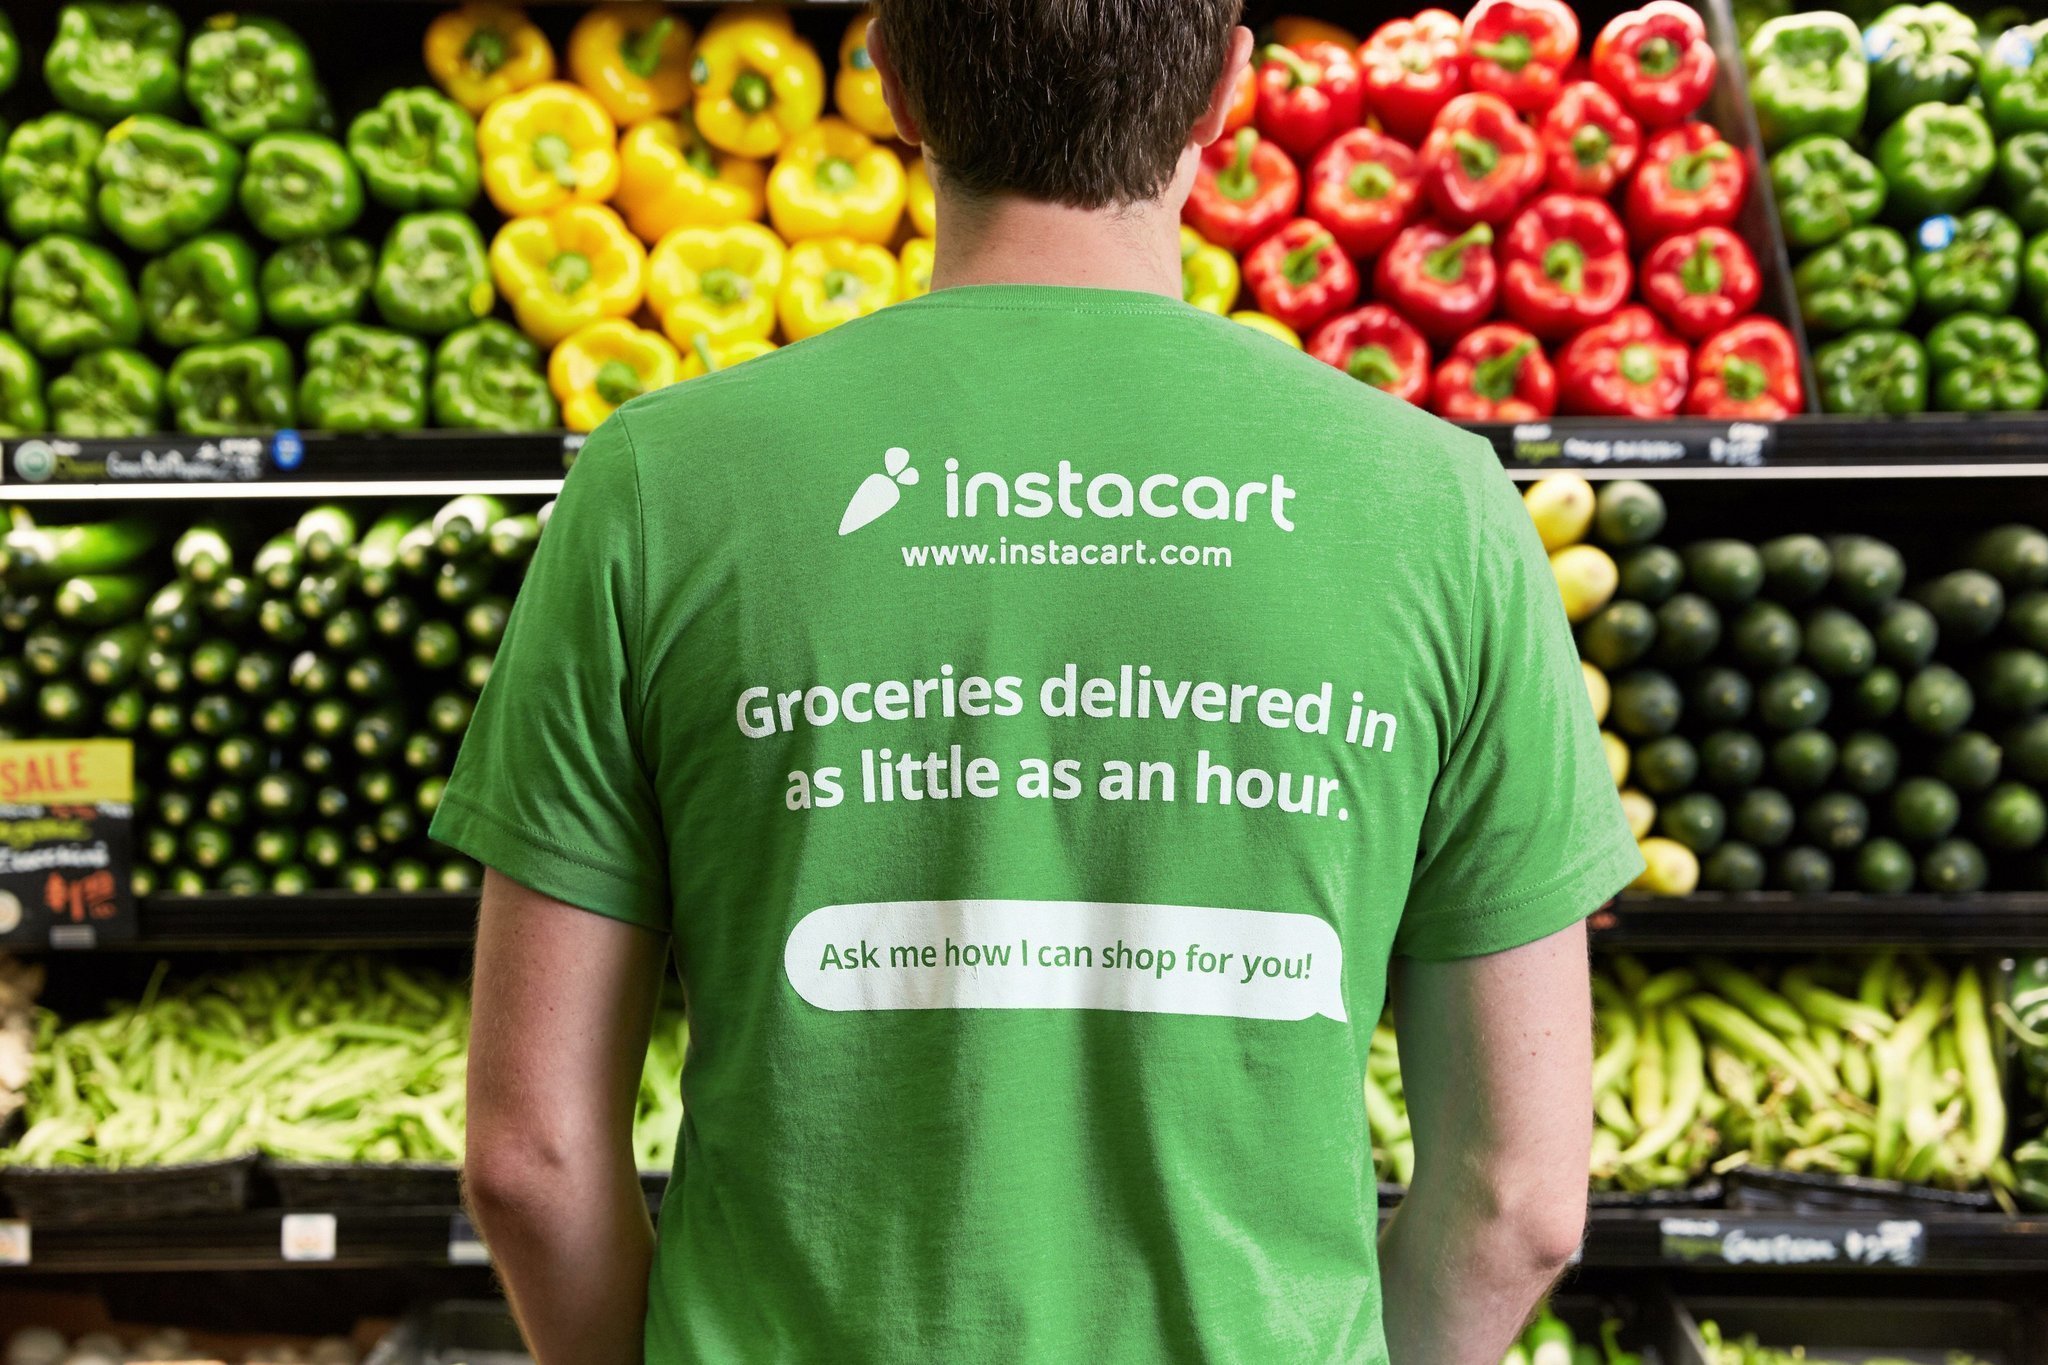 Instacart, Whole Foods ending delivery partnership